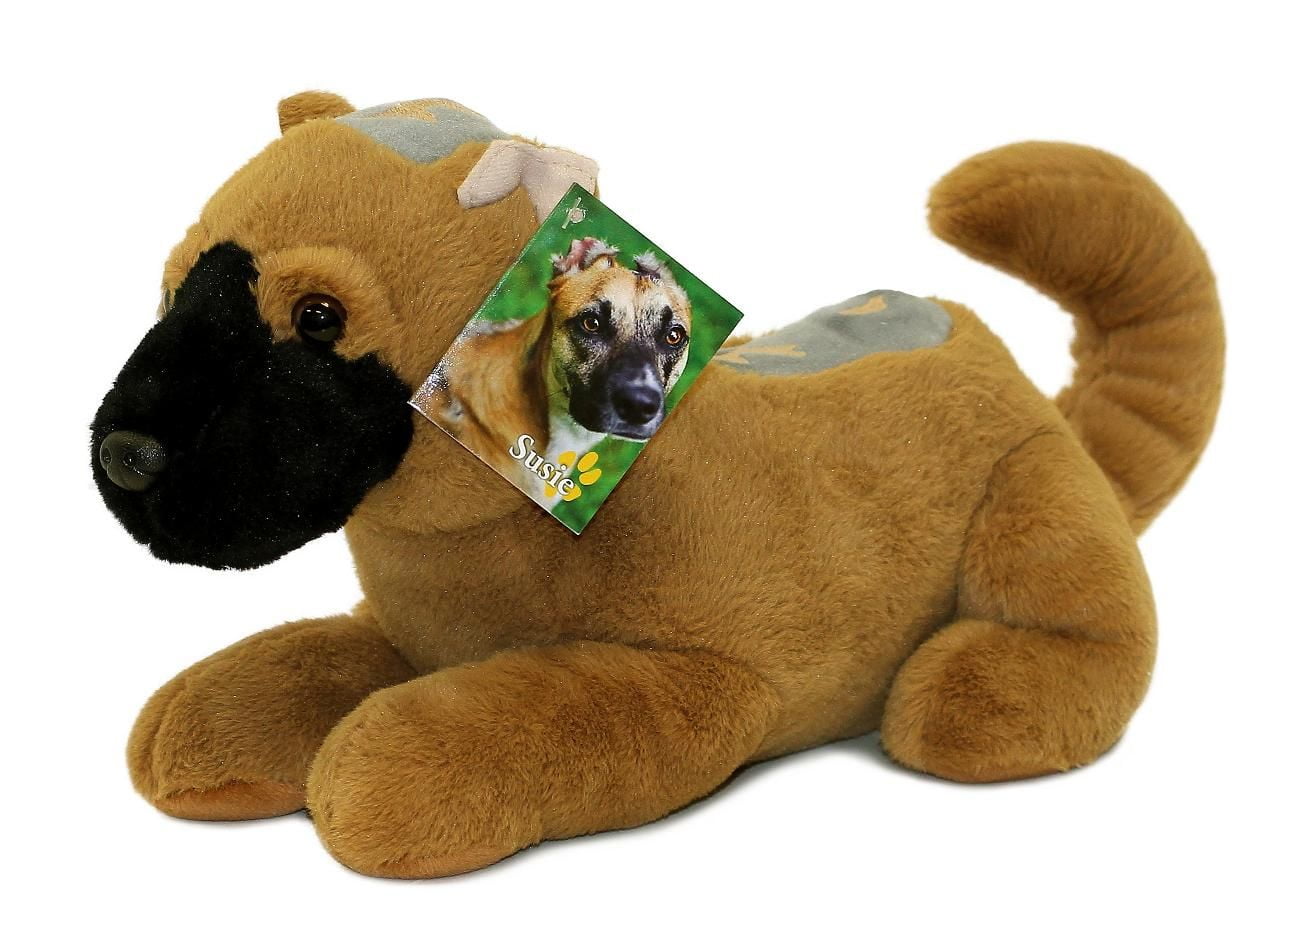 Details about   Aurora Dog Plush Puppy 12" Chunky Beans Stuffed Animal Toy